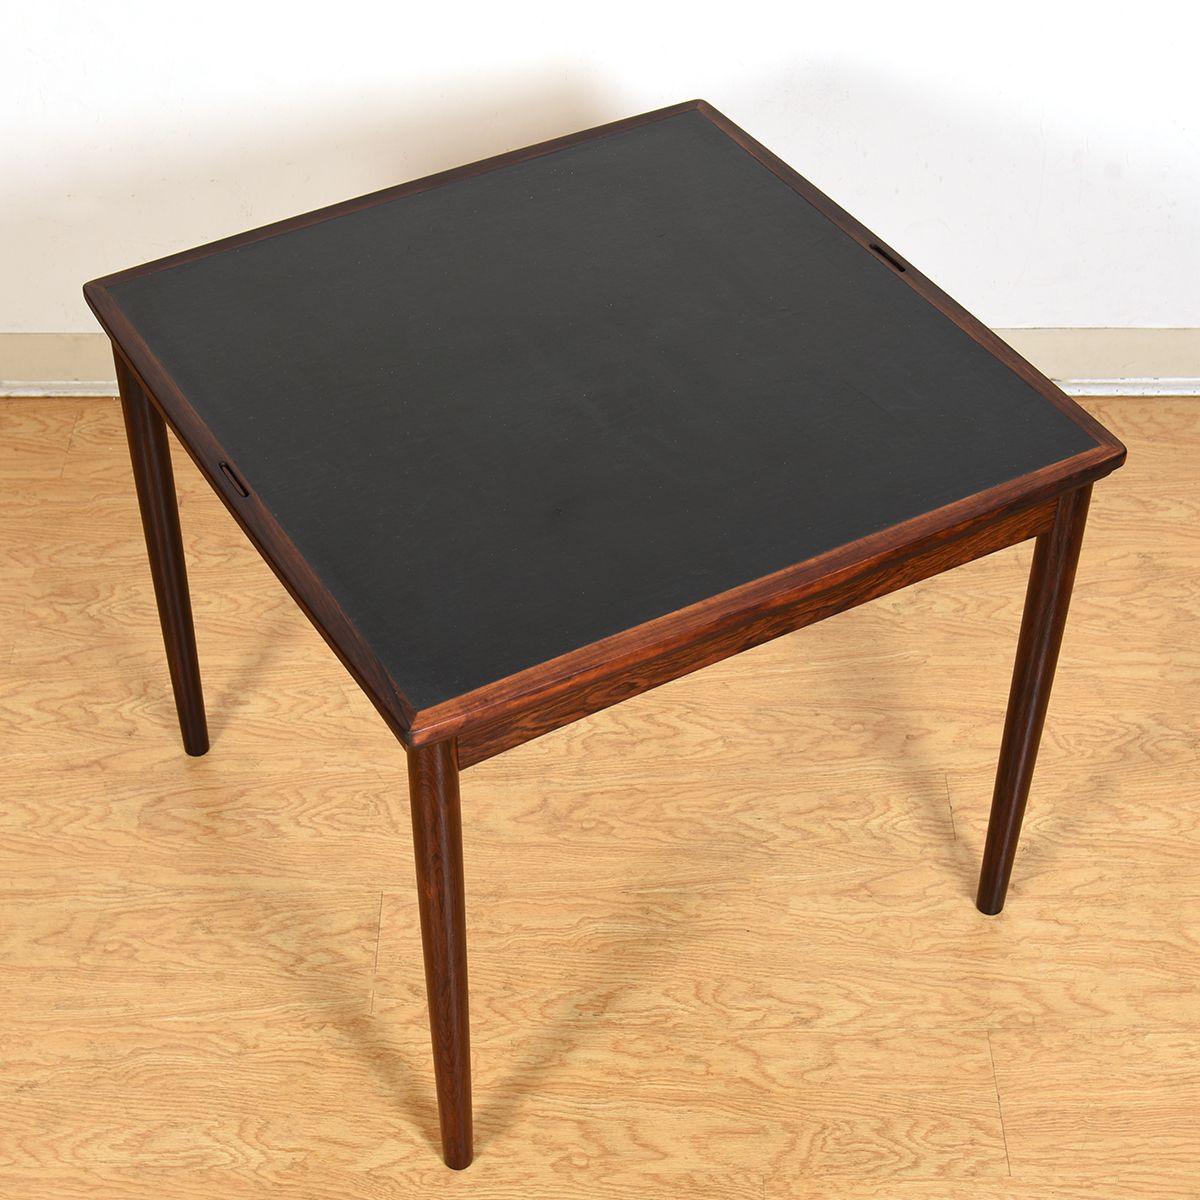 Table has a Flip-Top with rosewood on one side & a leatherette on its other side, to convert into a Wonderful ‘Game Table’!

Width Dimension: W 31.5